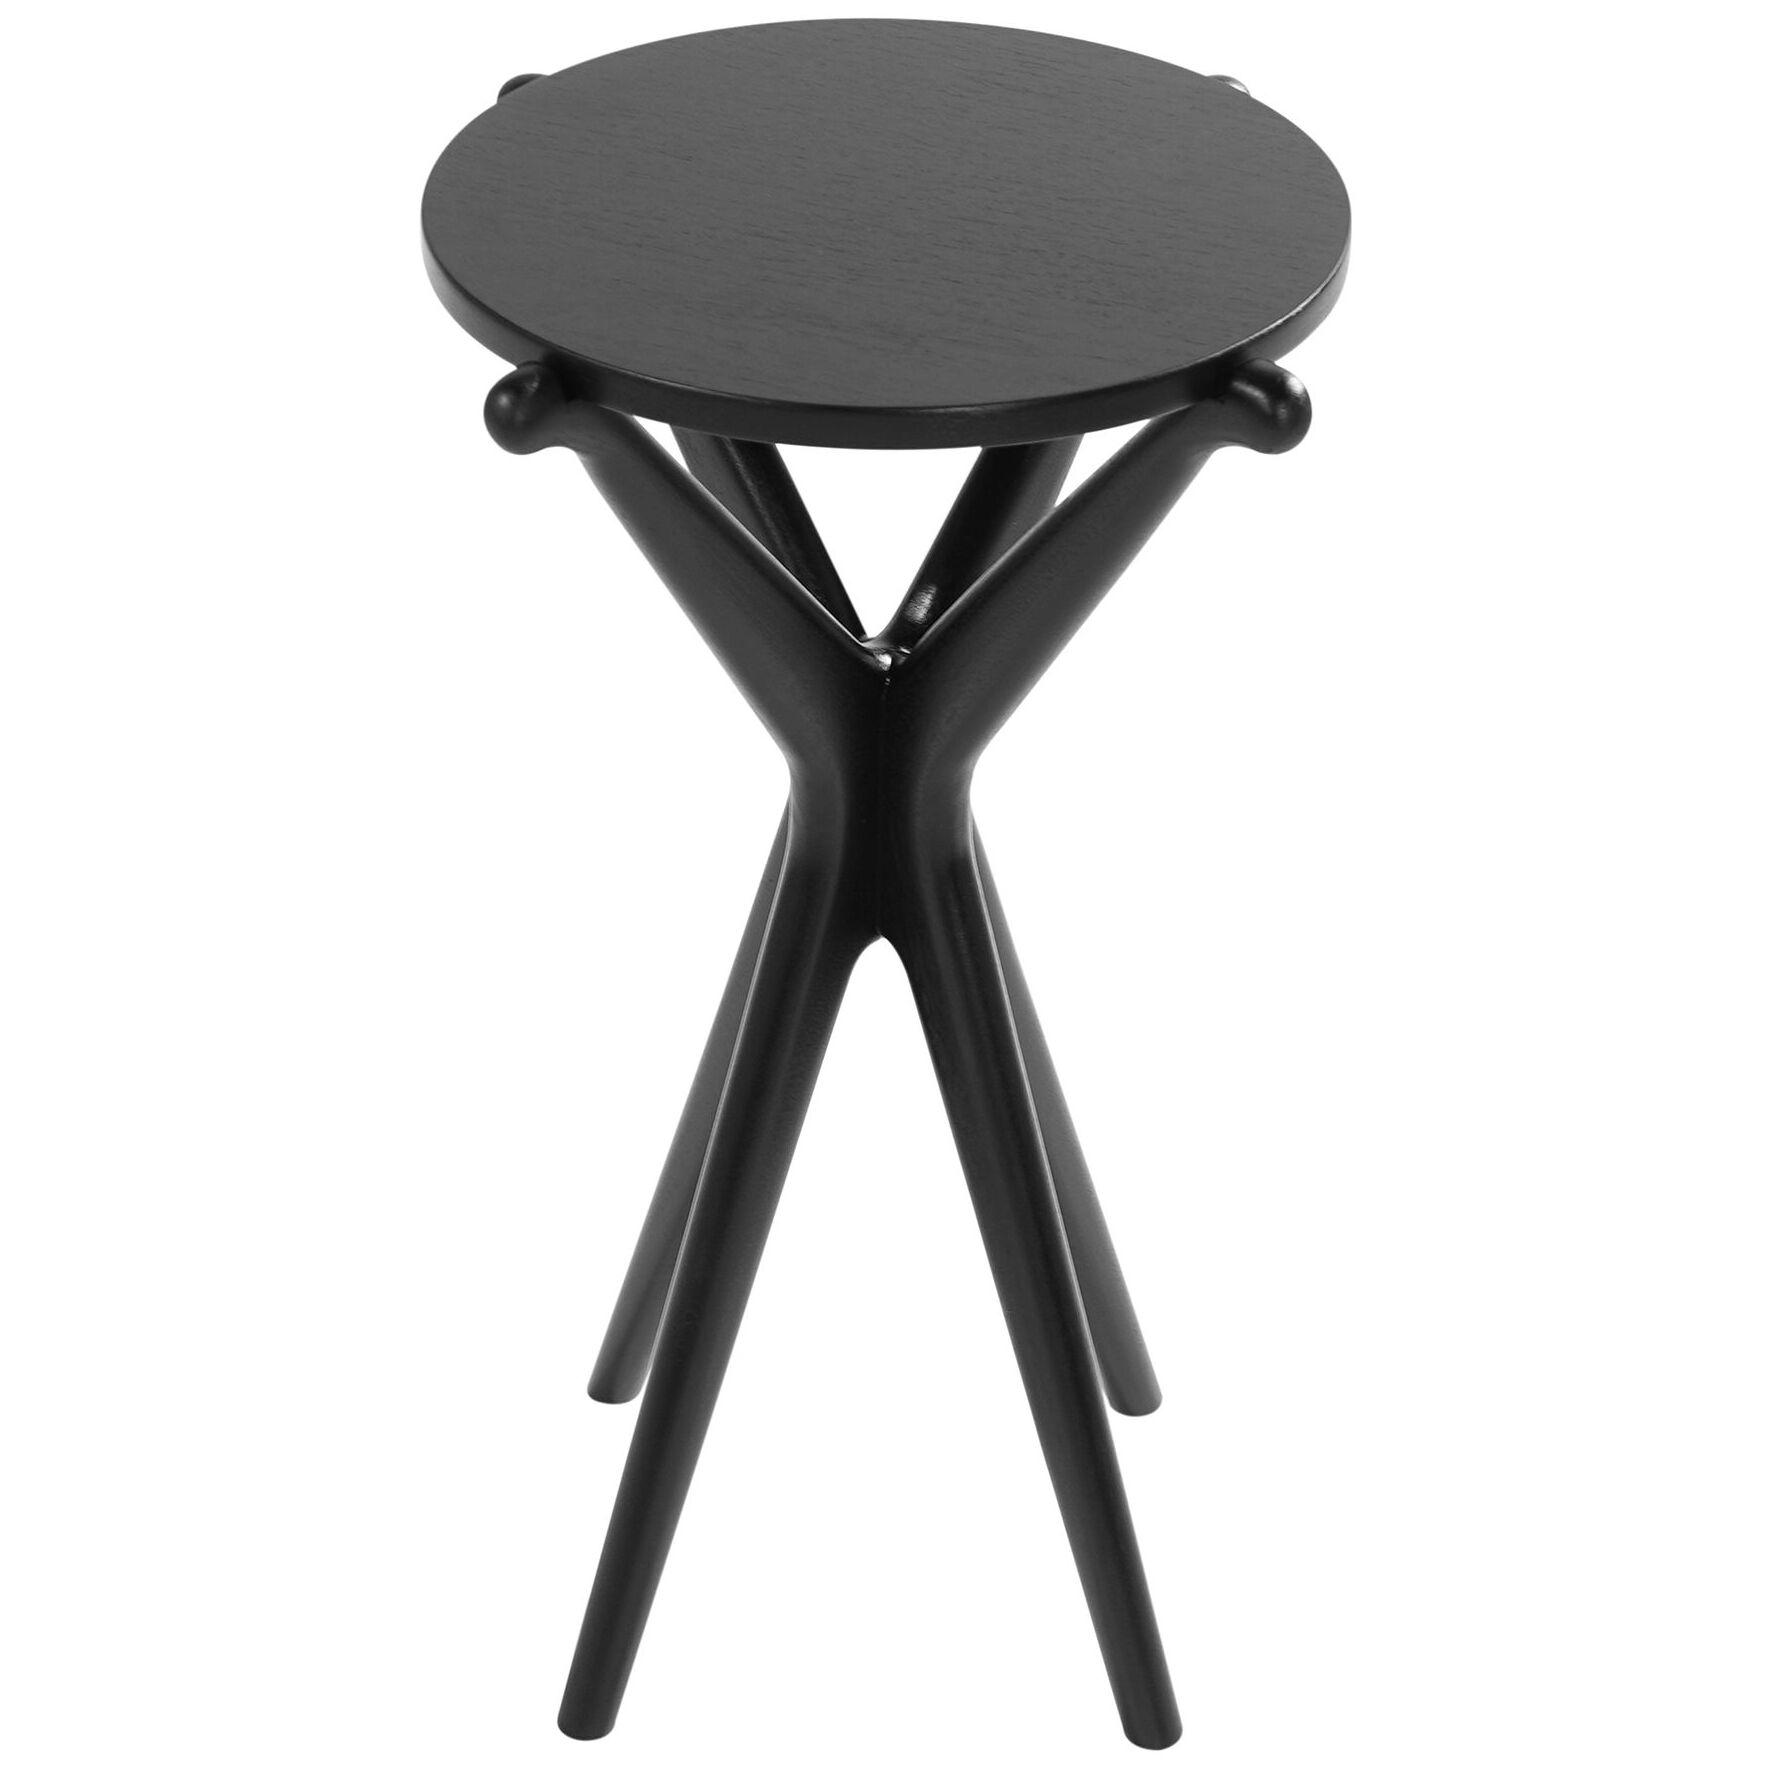 Blackout Gazelle Collection Drinks Table